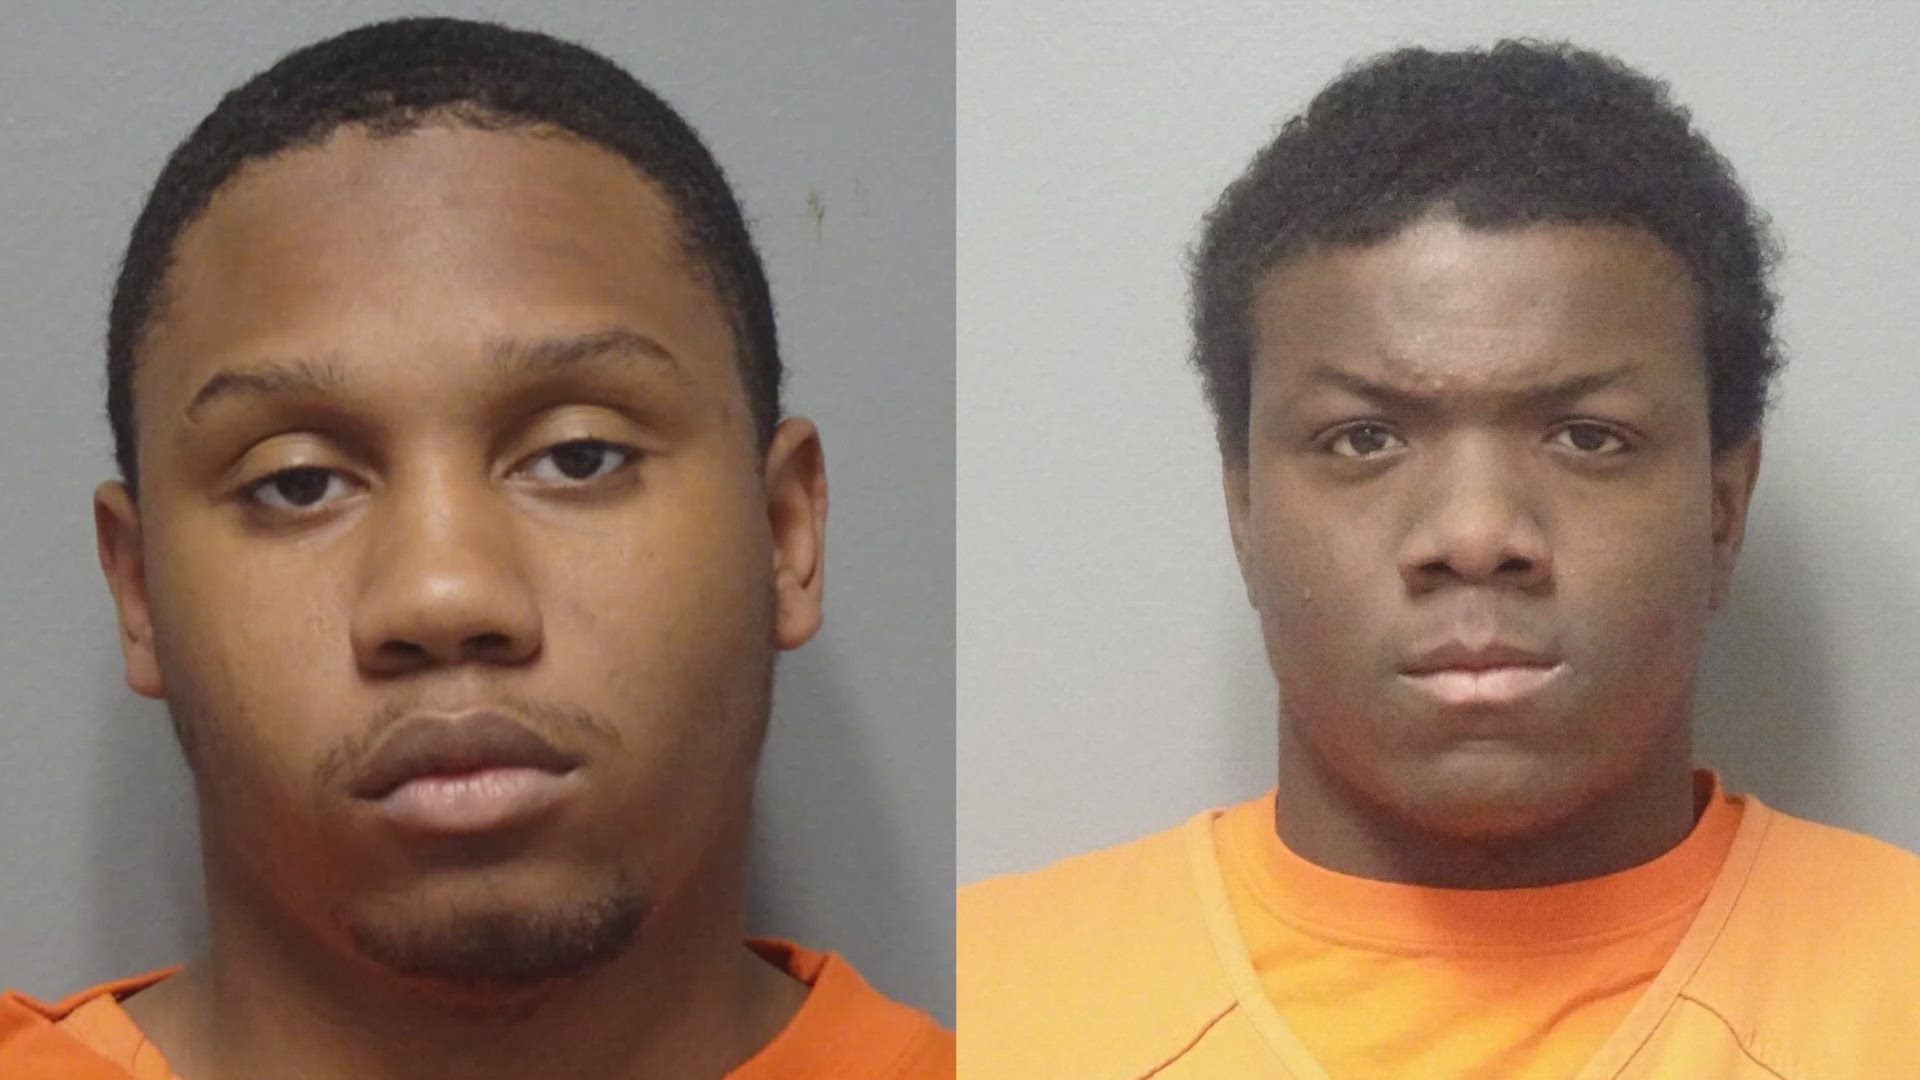 Tyric Green and D'Andre Morris were indicted on several charges, including attempted murder, aggravated arson and more.